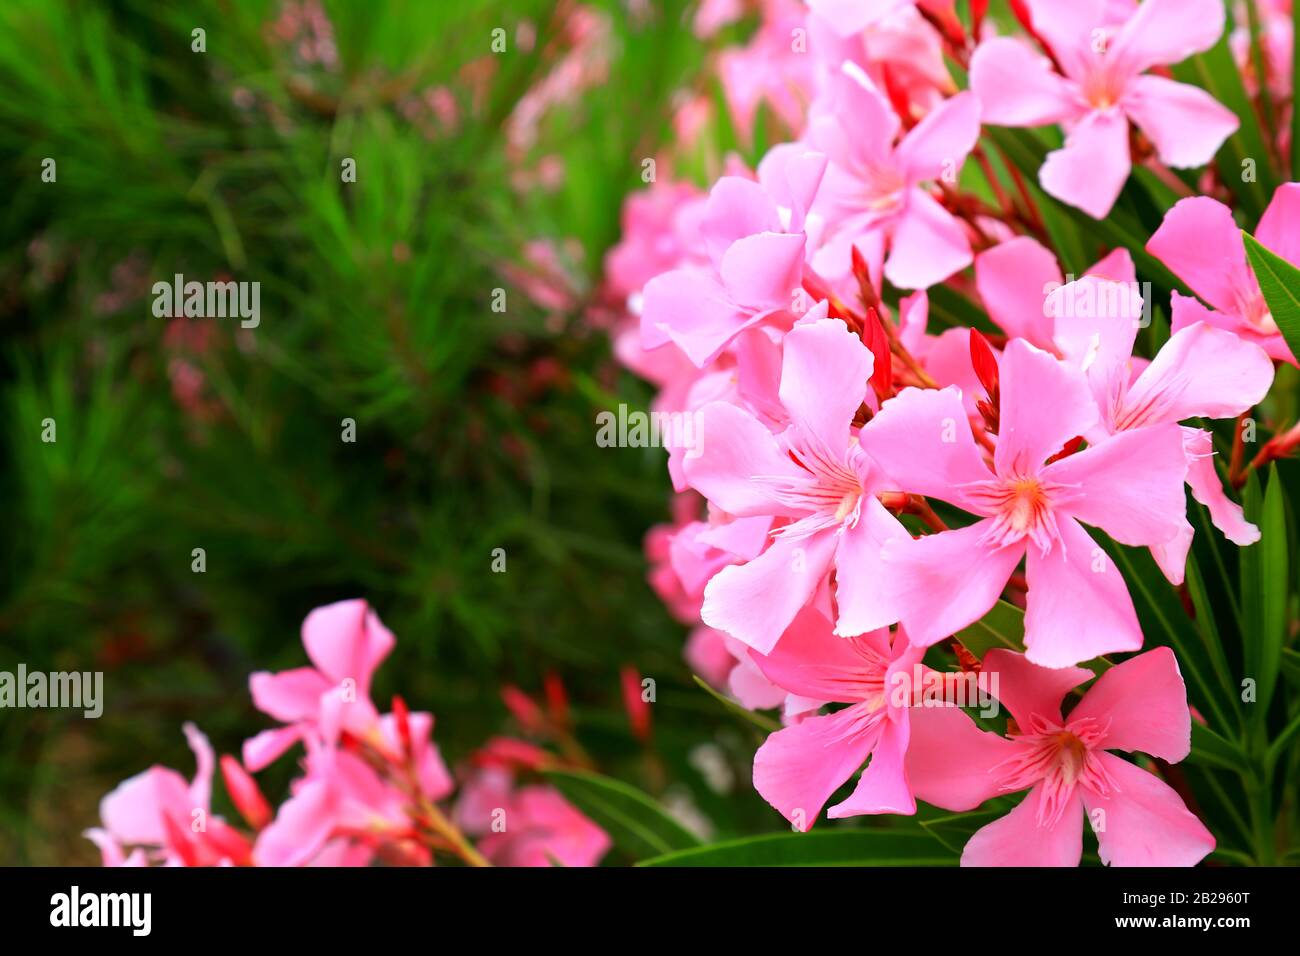 Delicate flowers of a pink oleander, Nerium oleander, bloomed in the spring. Shrub, a small tree from the cornel Apocynaceae family. Stock Photo